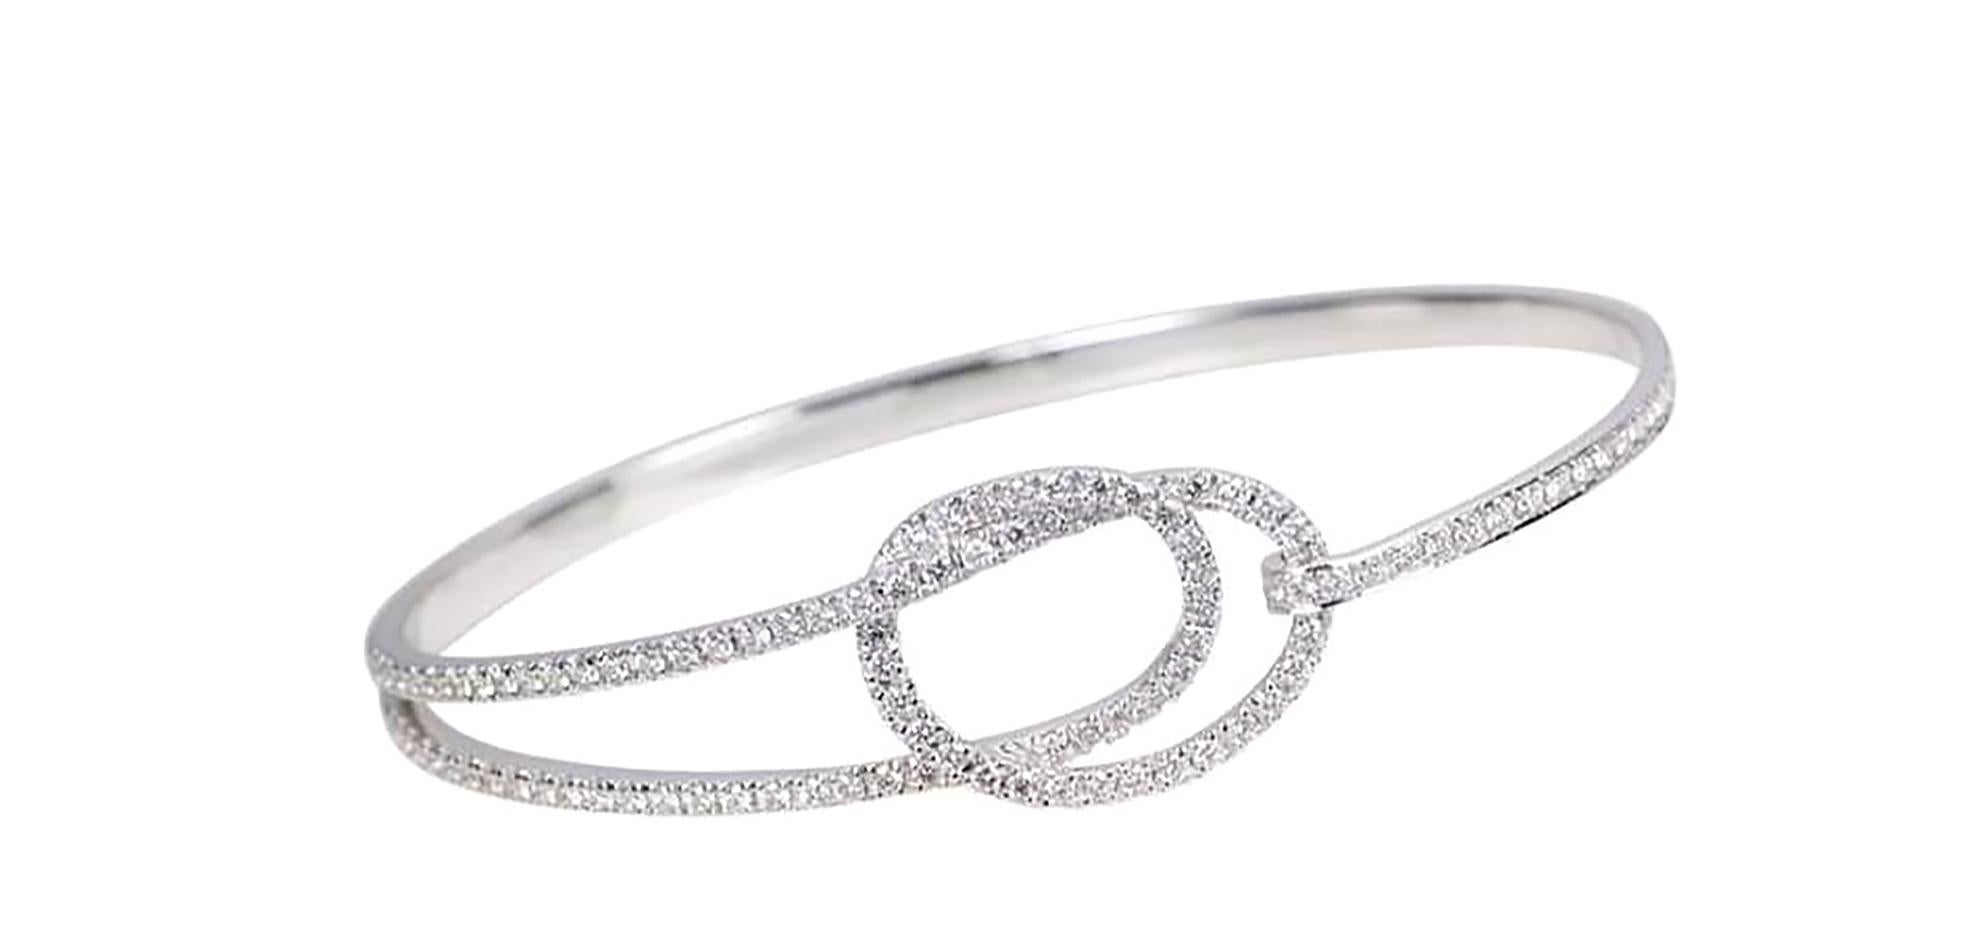 Talisman: Eternity Knot Diamond 1.25 carats Bangle in 18K White Gold  Settings

Width: 1.6 cm
Diameter: 6.0 cm

Each talisman bears modern comfort and sensibility while embracing the beauty of ancient motifs, beliefs and cultures.
FOUNDED BY